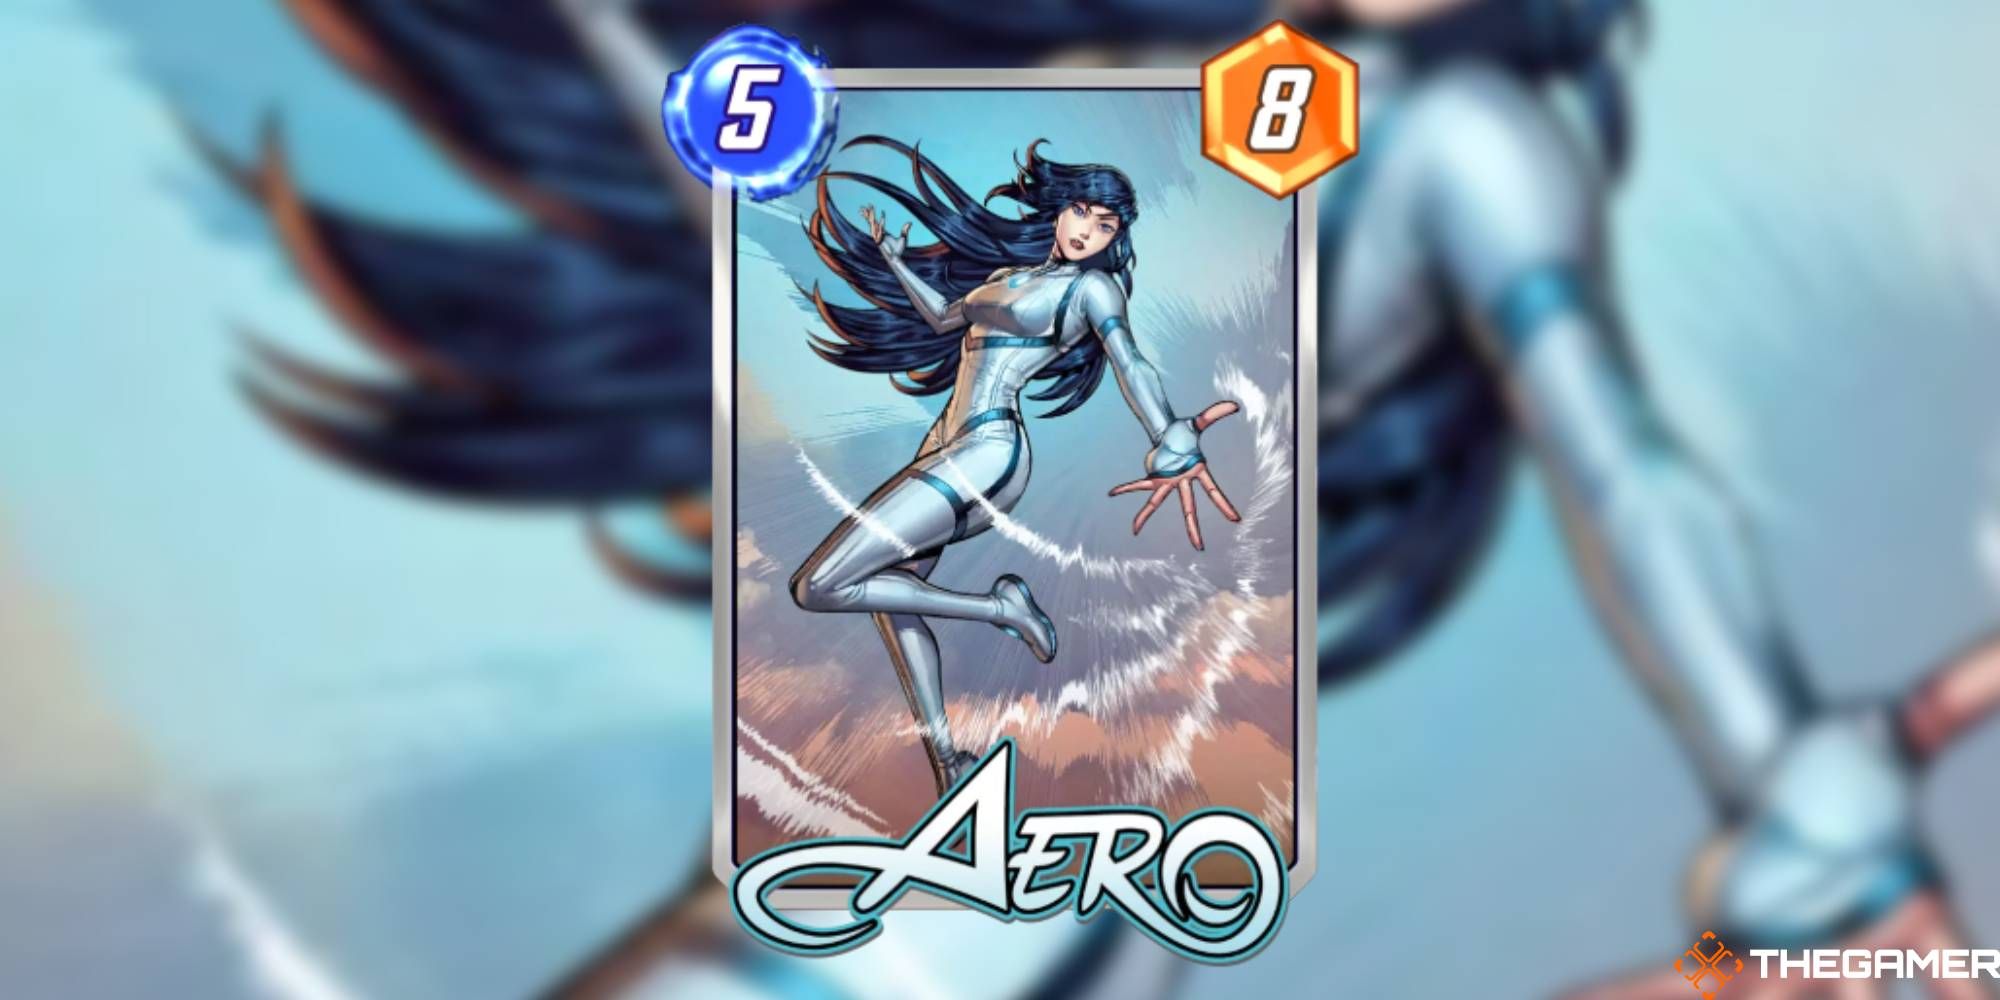 Aero from Marvel Snap with blurred background